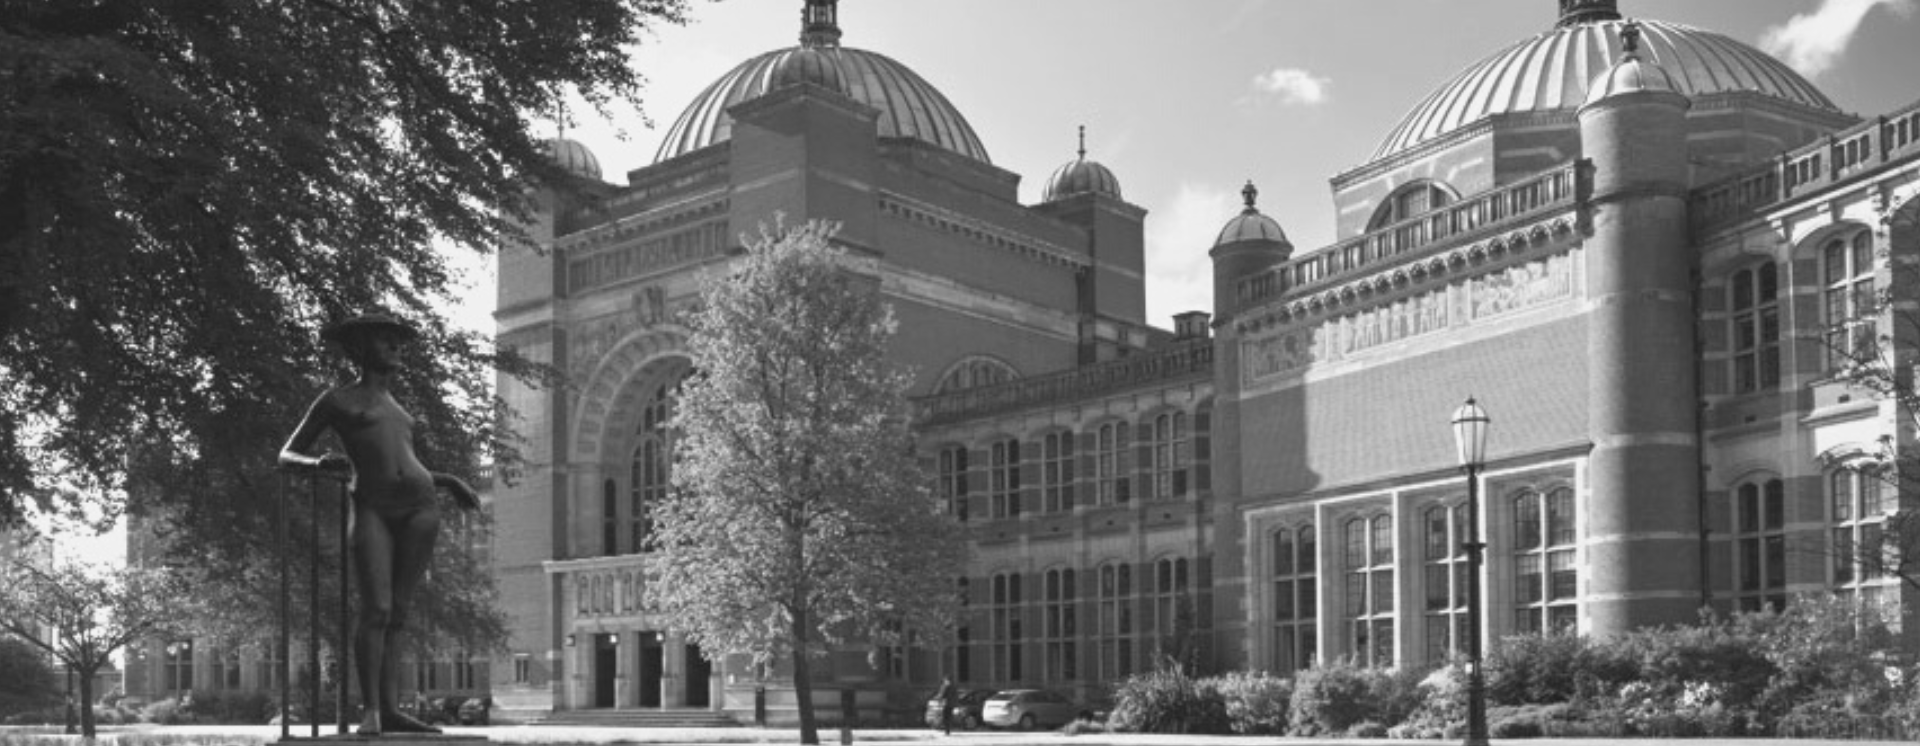 Aston Webb building - large domes buildings to the rear and trees to the foreground